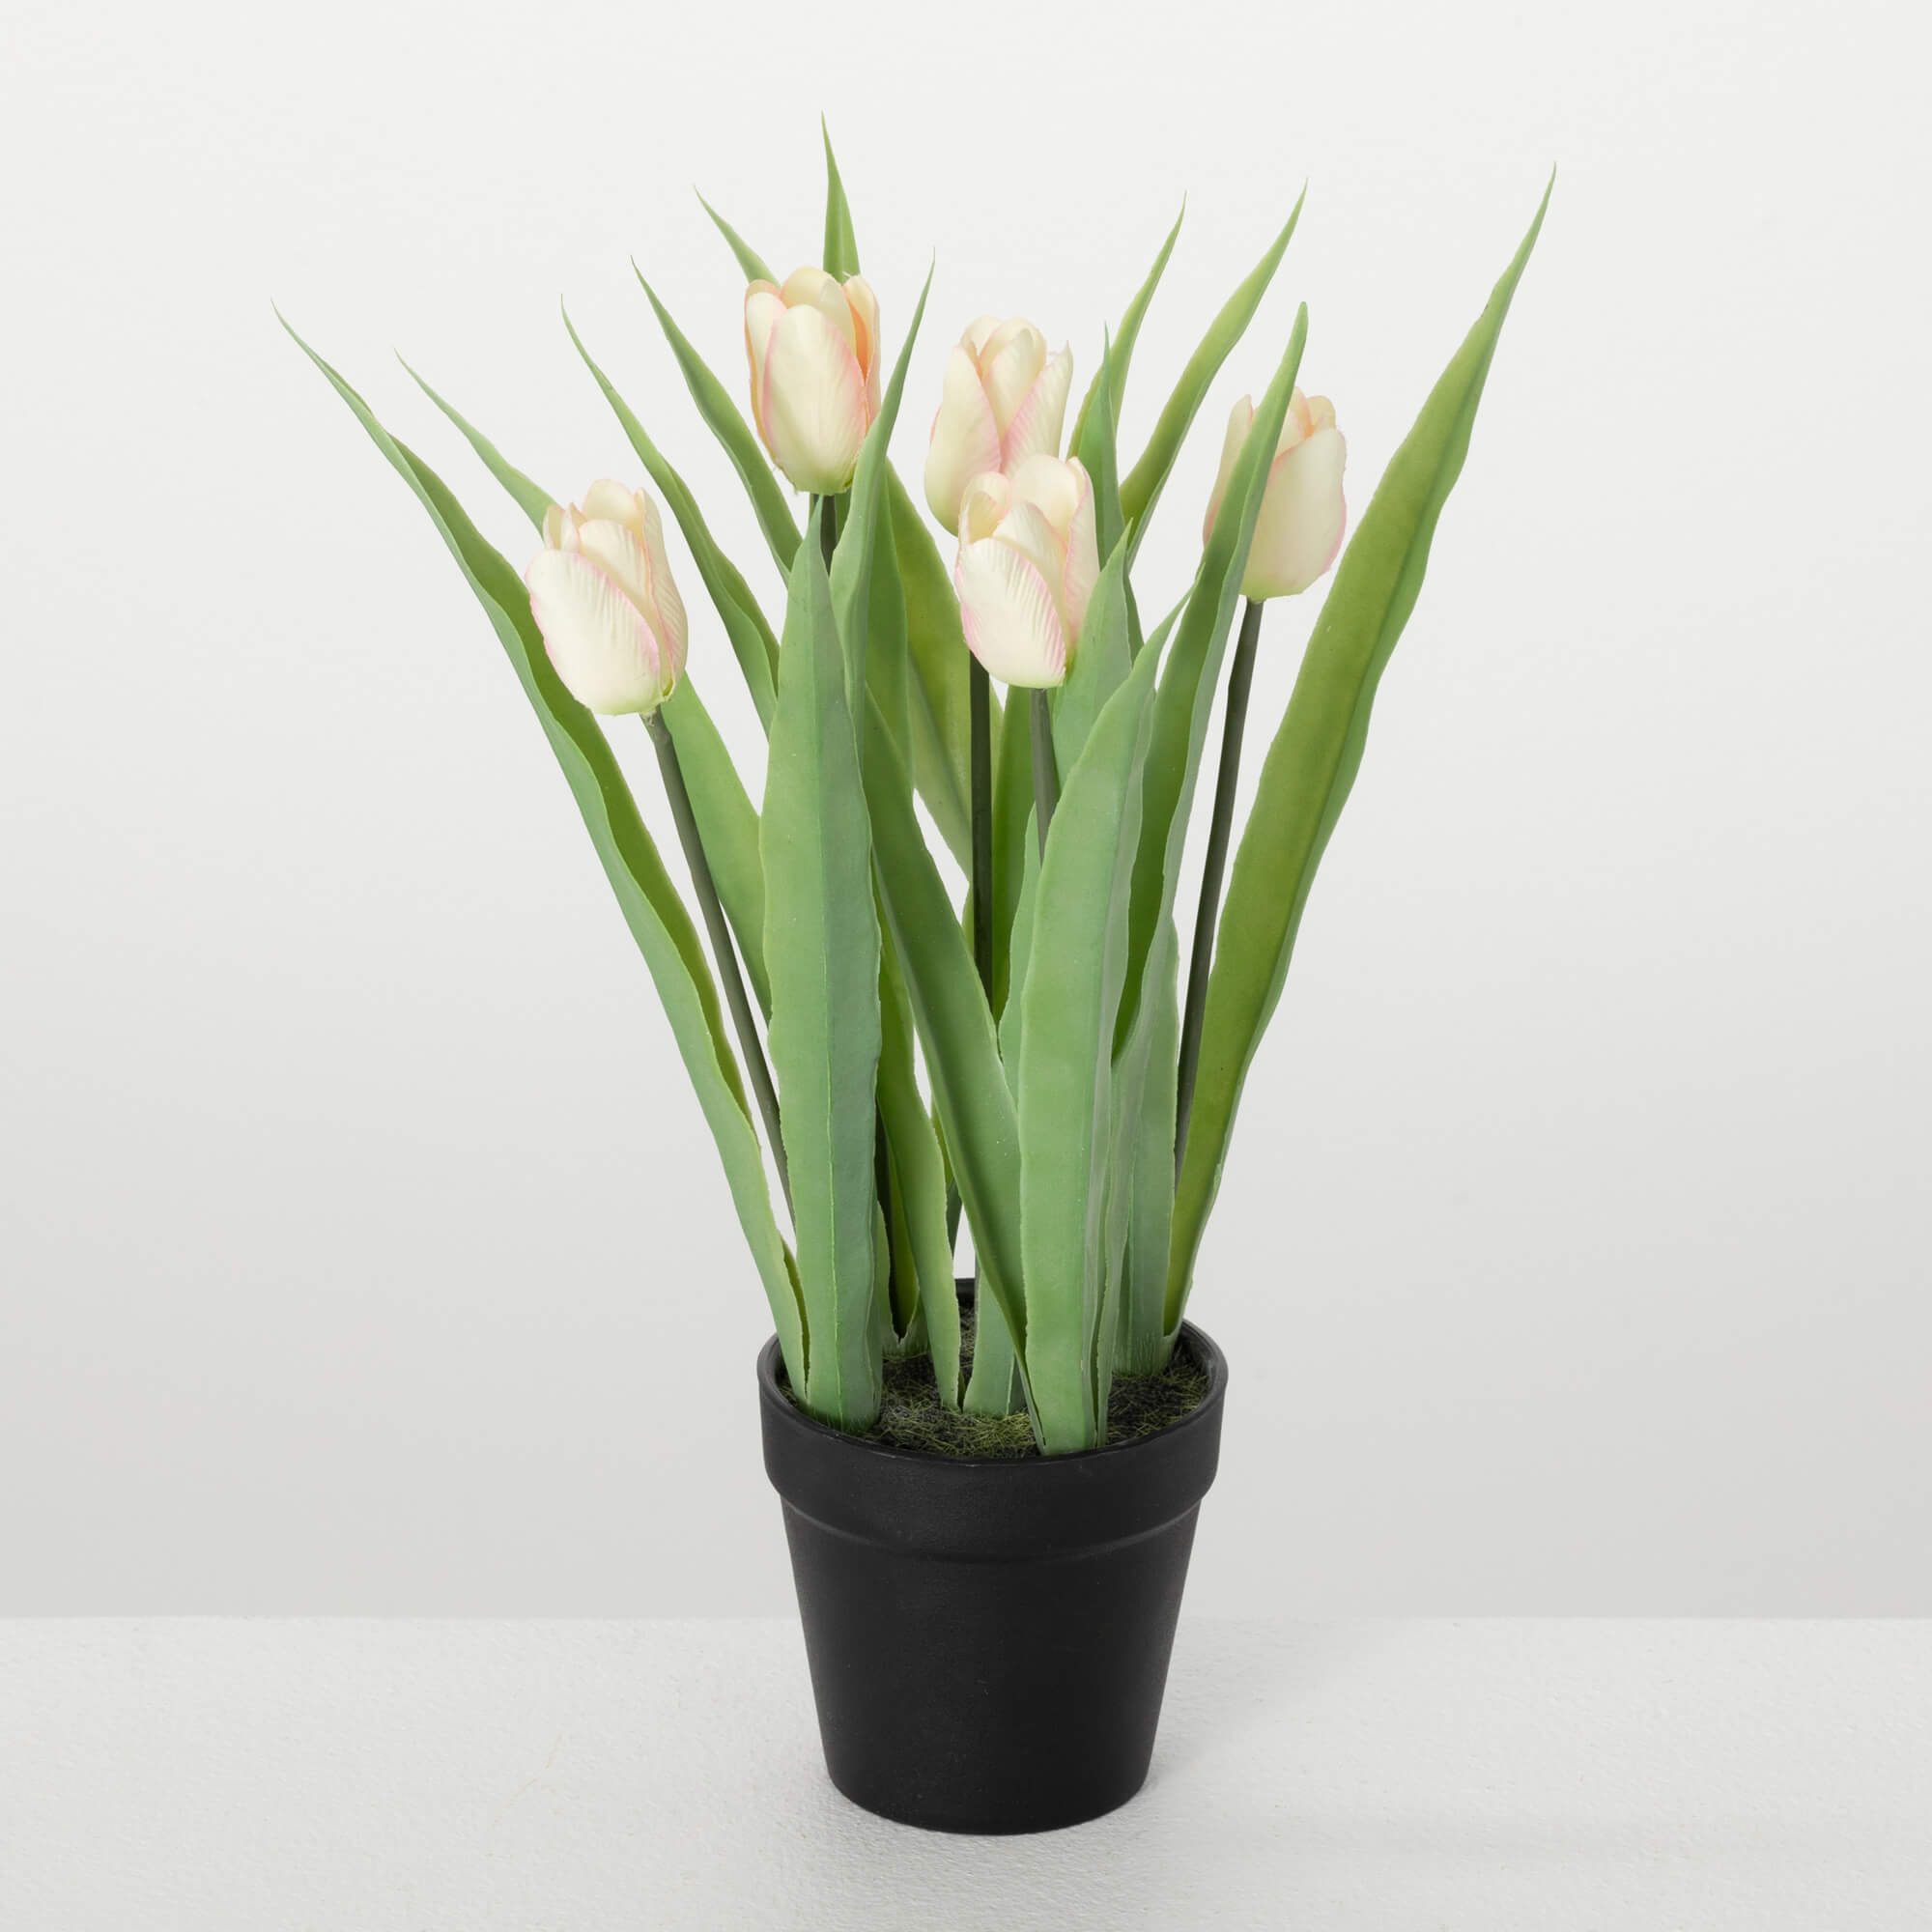 CREAMY PINK POTTED TULIP